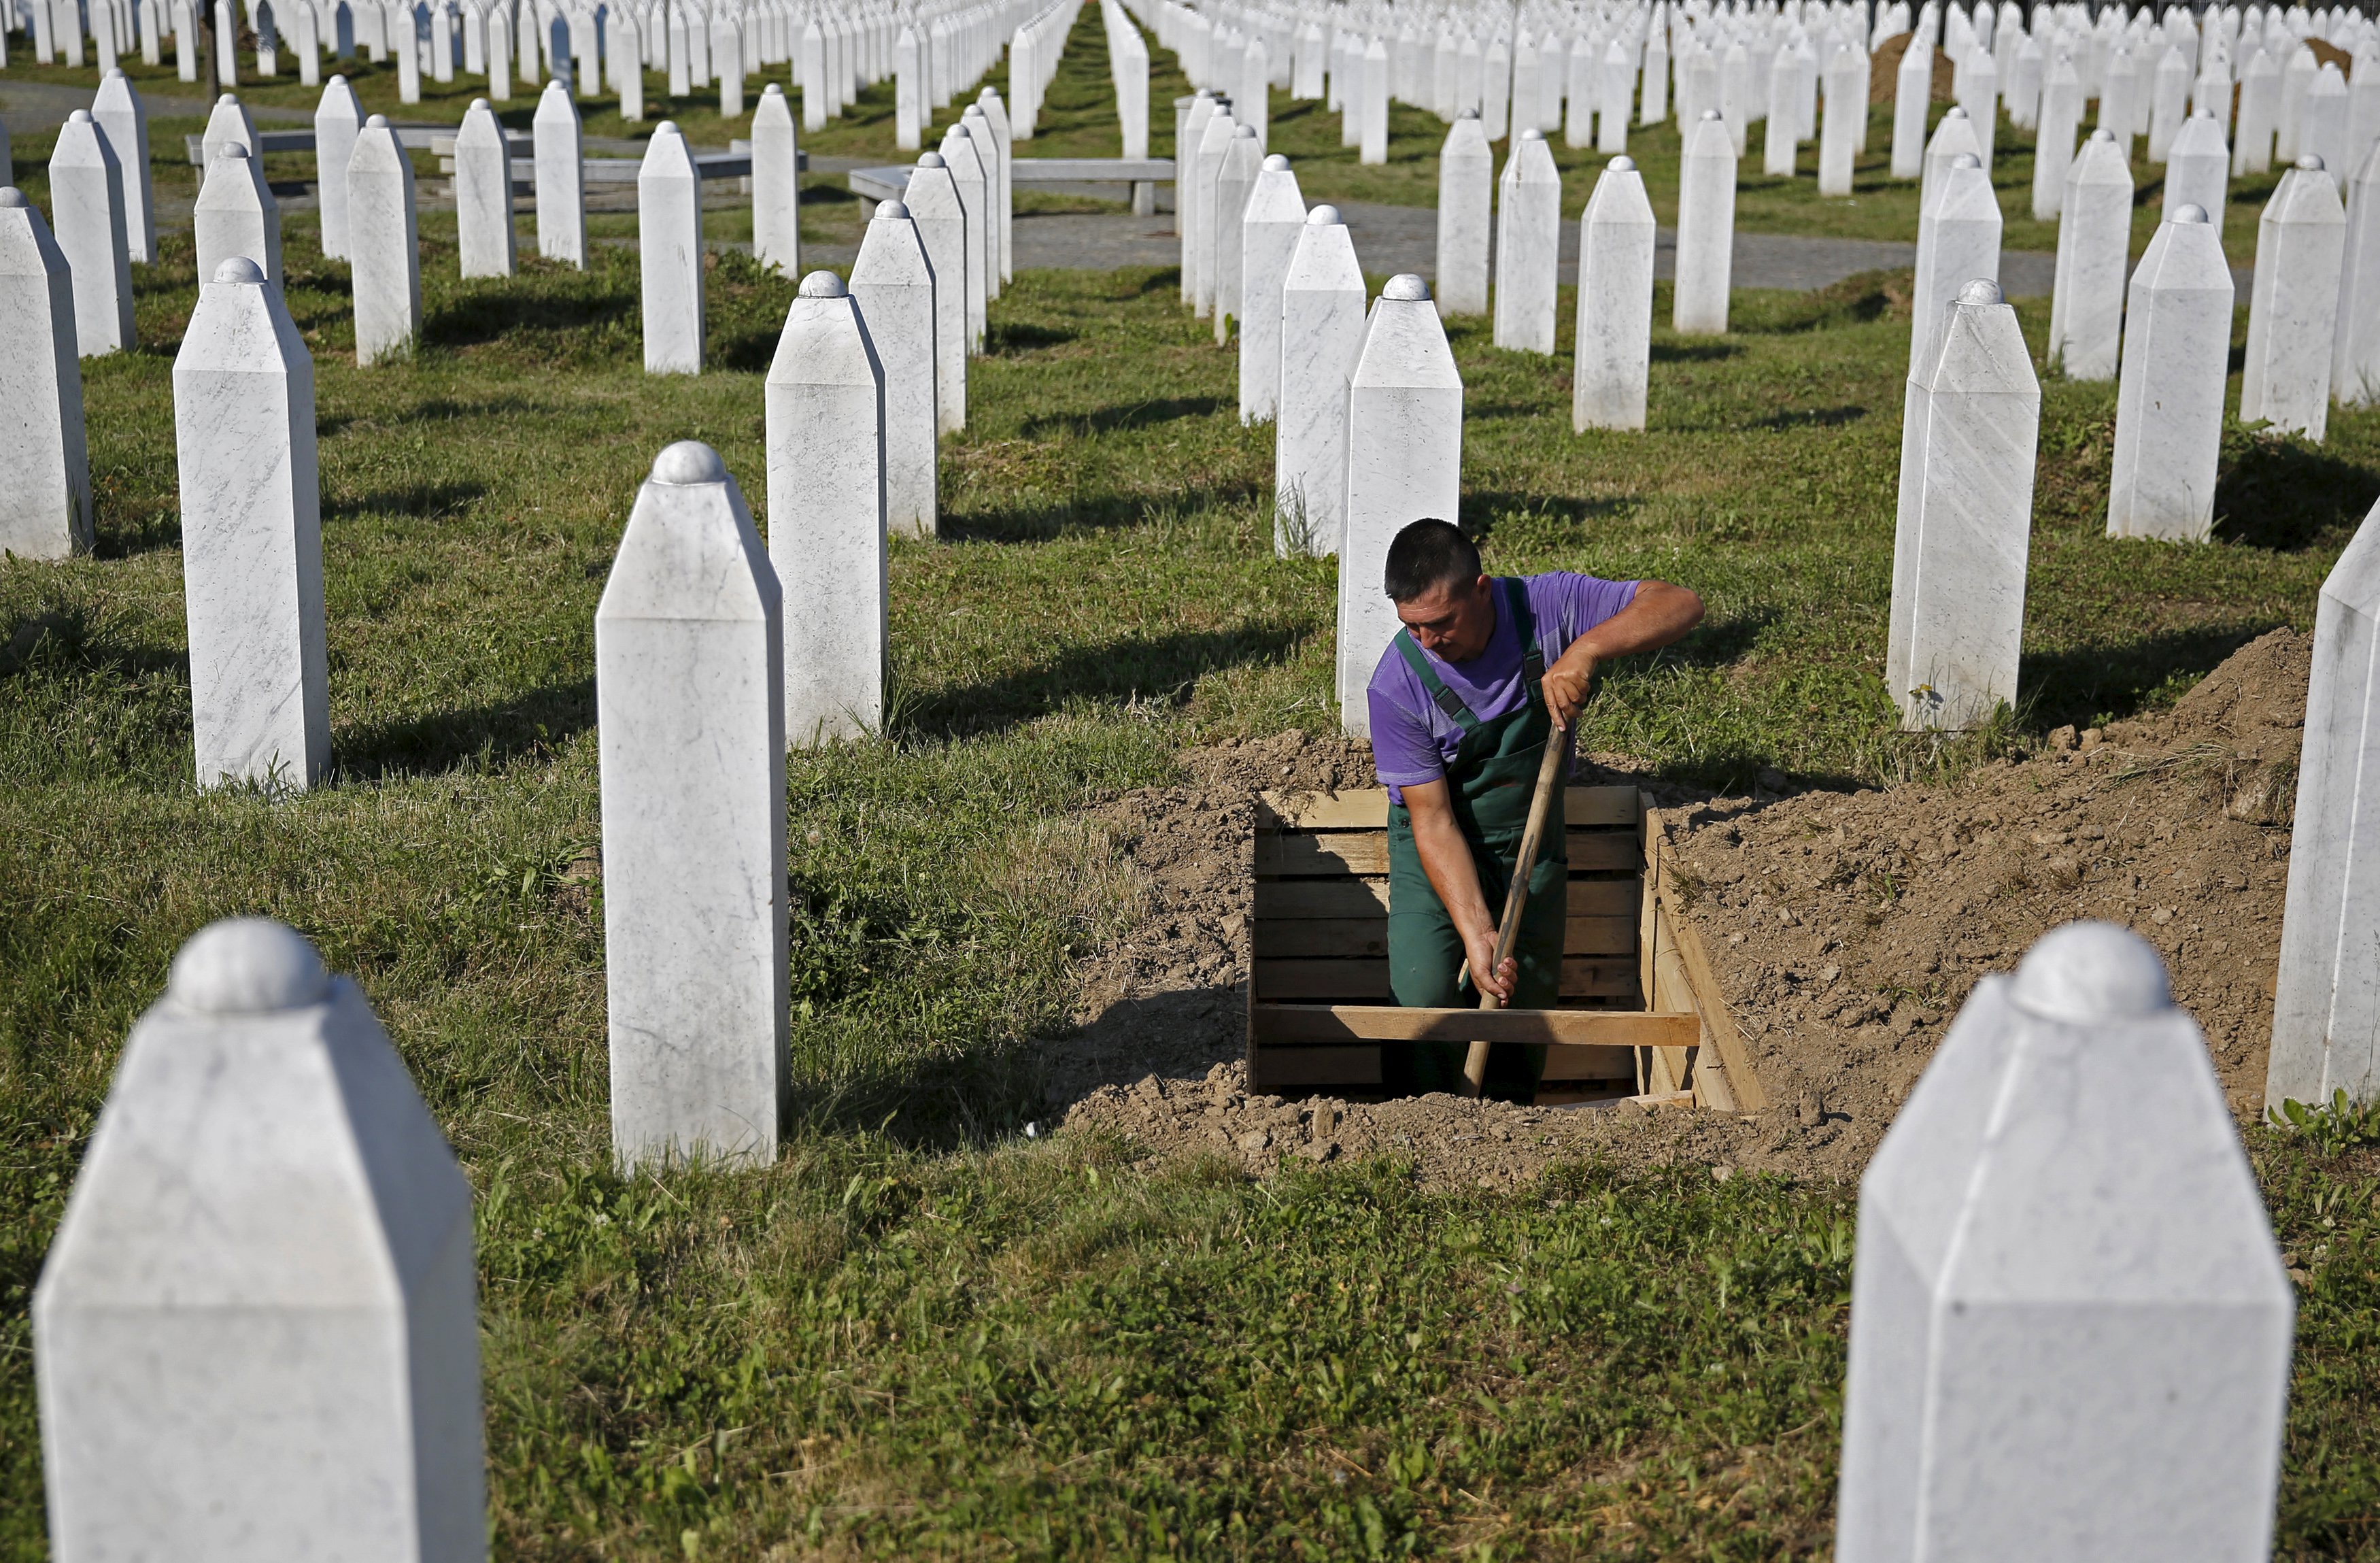 A worker digs graves at a memorial centre for Srebrenica Massacre victims in Potocari July 5, 2015. Tens of thousands of family members, foreign dignitaries and guests are expected to attend a ceremony in Srebrenica on July 11 marking the 20th anniversary of the massacre in which Bosnian Serb forces commanded by Ratko Mladic killed up to 8,000 Muslim men and boys. Nearly 136 identified victims will be buried at a memorial cemetery during the ceremony, their bodies found in some 60 mass graves around the town. REUTERS/Dado Ruvic